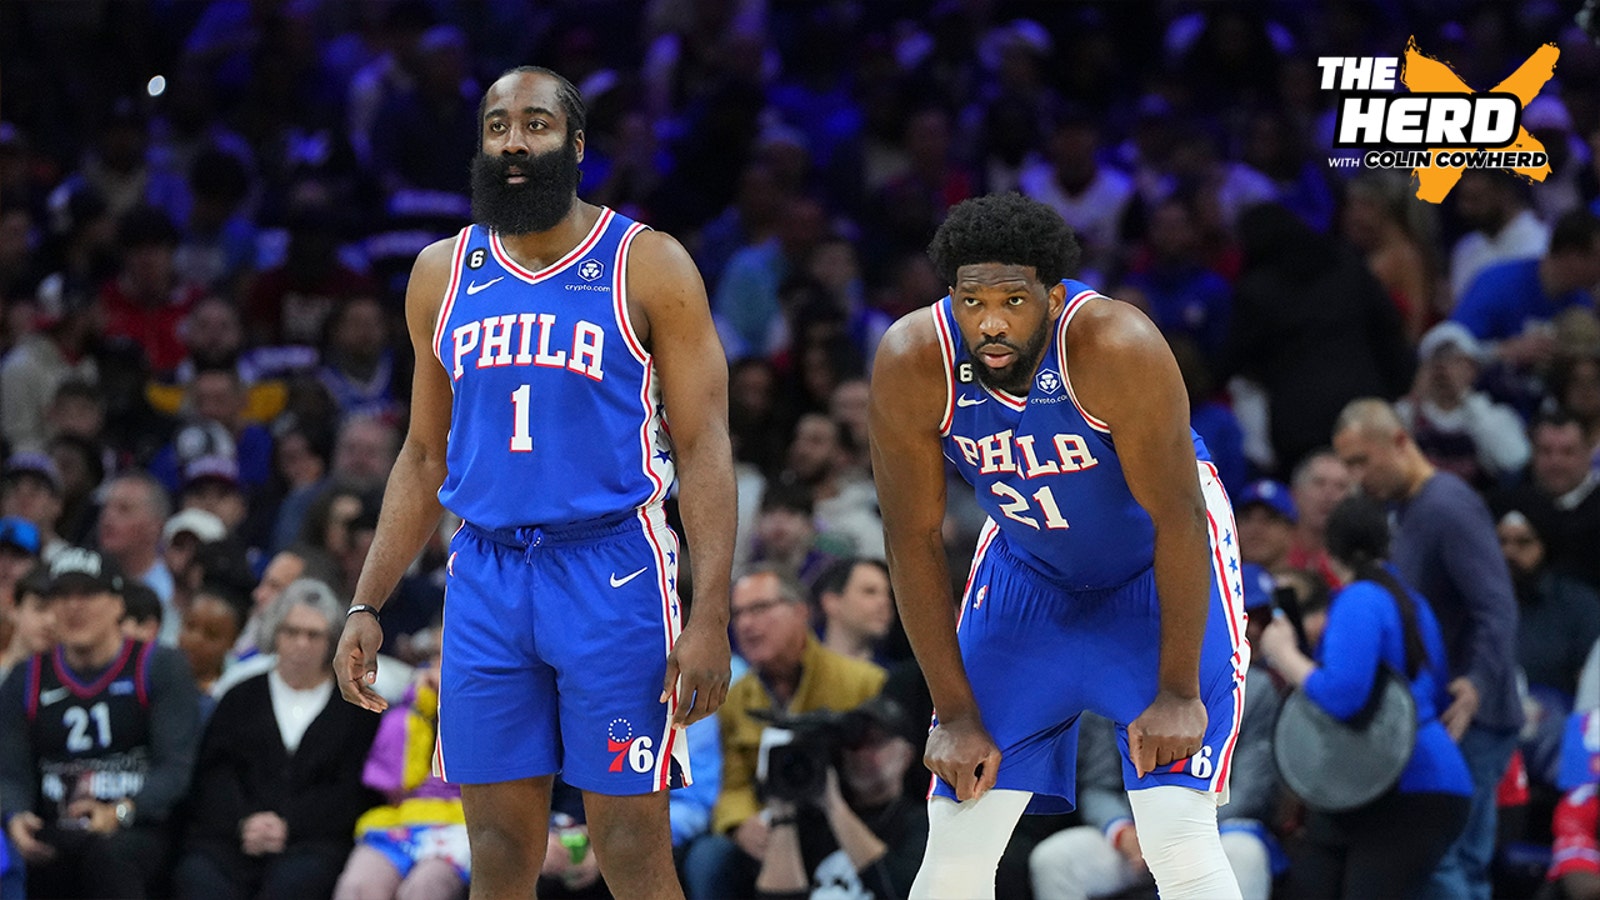 Were Joel Embiid's flagrant, James Harden's ejection the right calls?